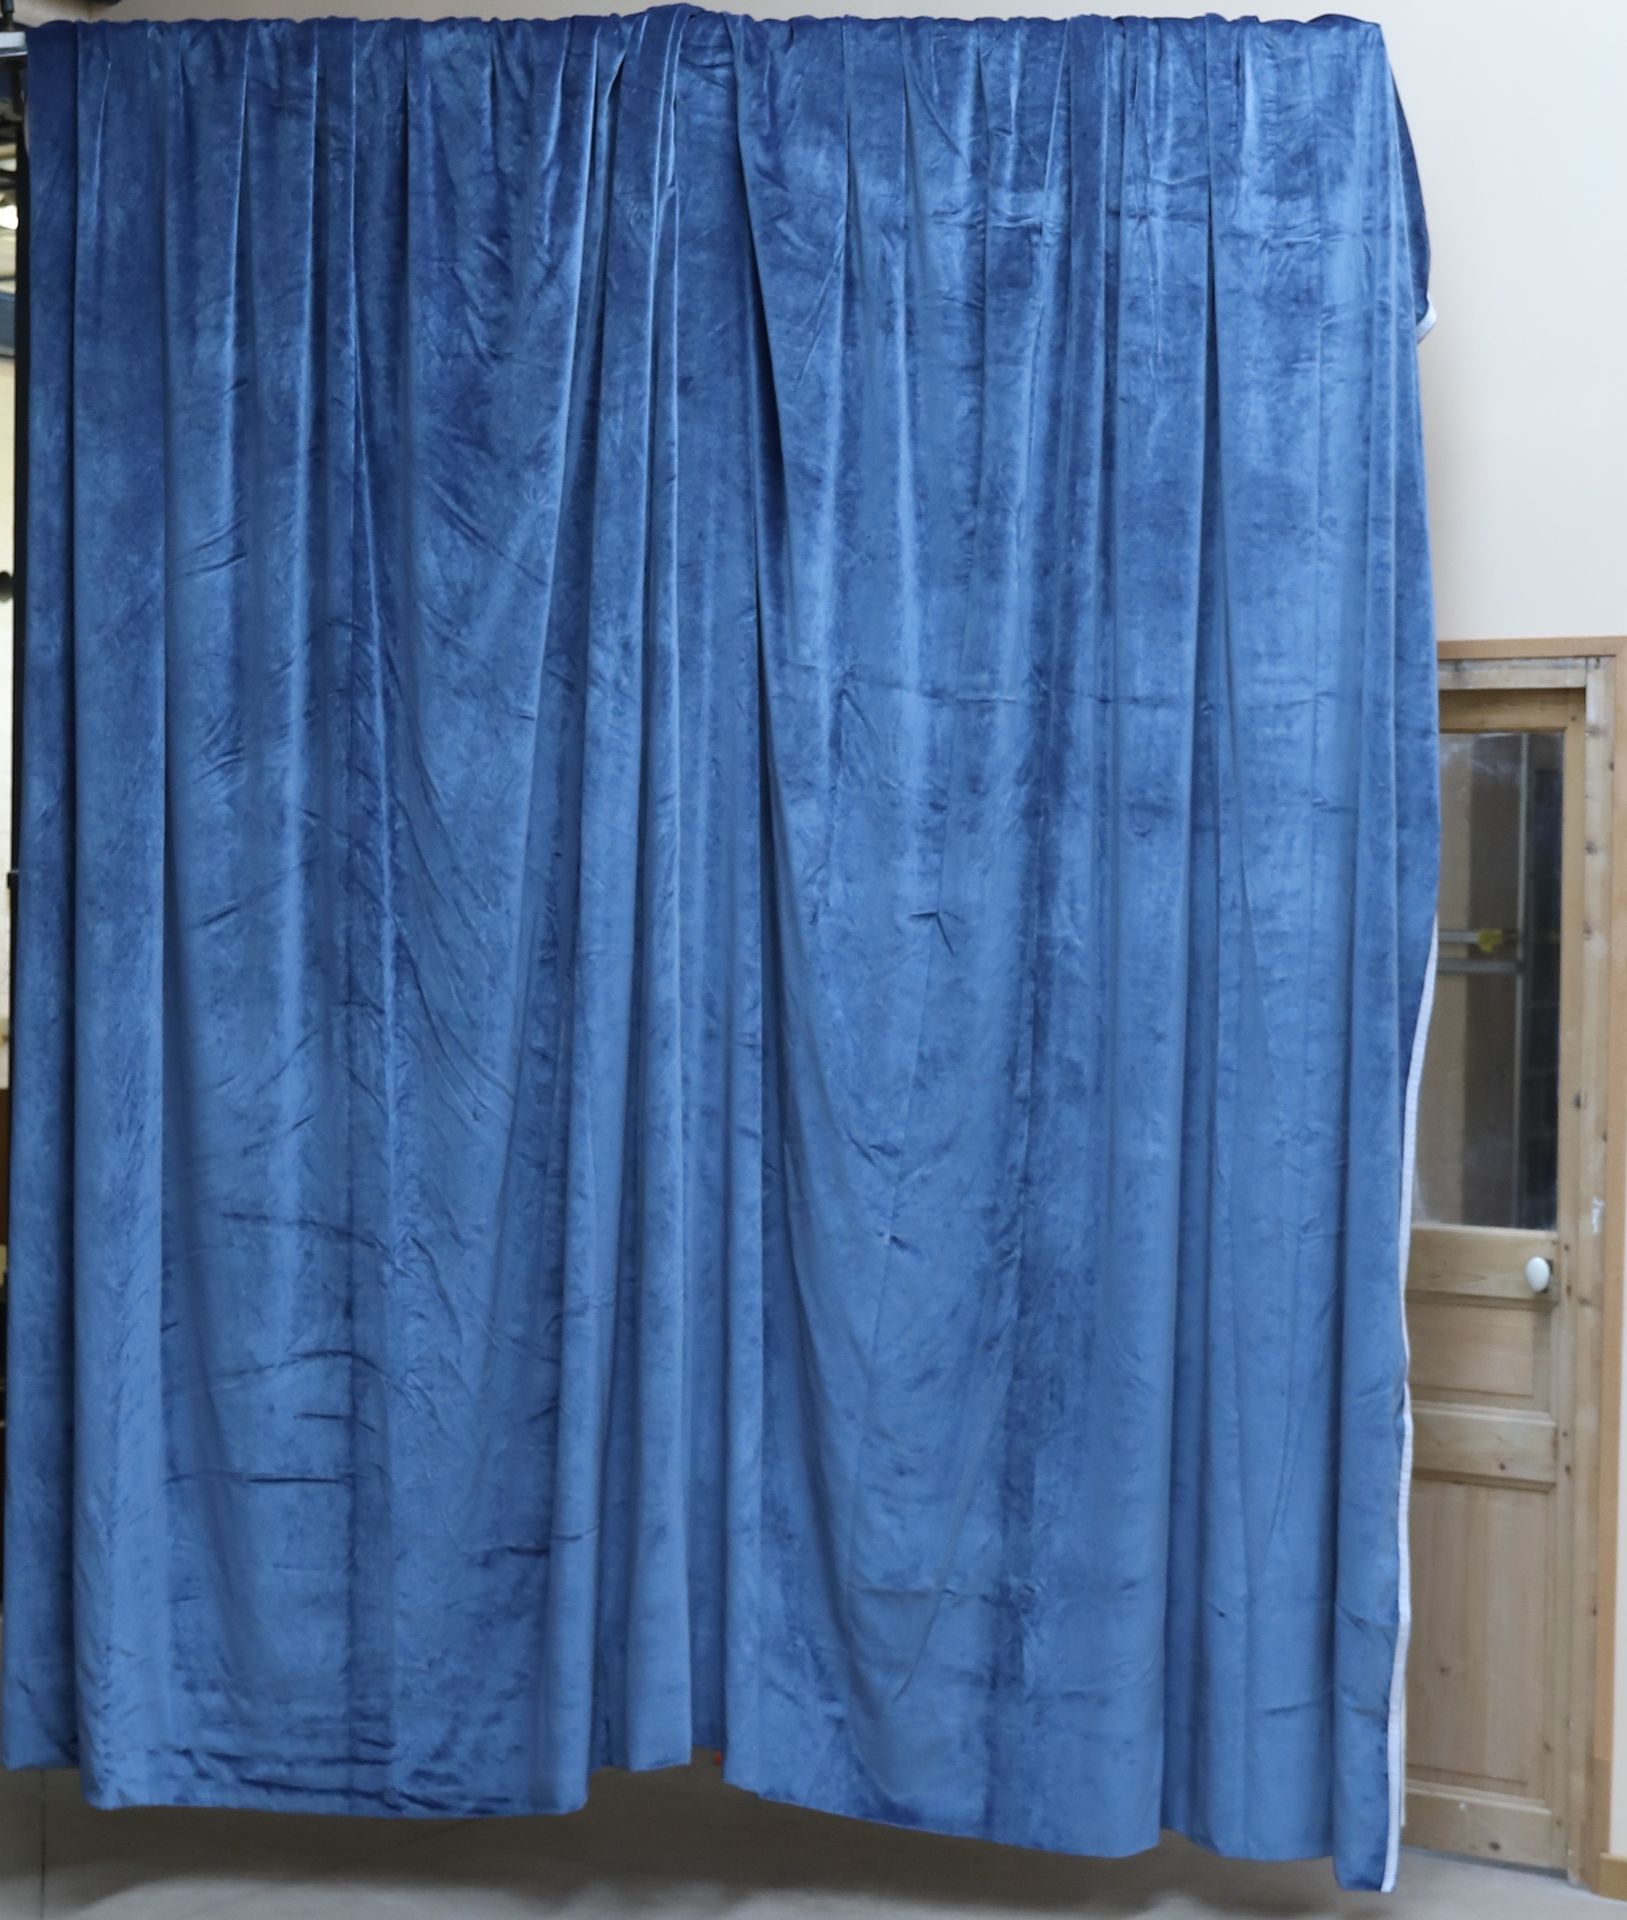 Null PAIR OF LARGE CURTAINS IN LIGHT BLUE VELVET
330 x 240 cm approx.
Very good &hellip;